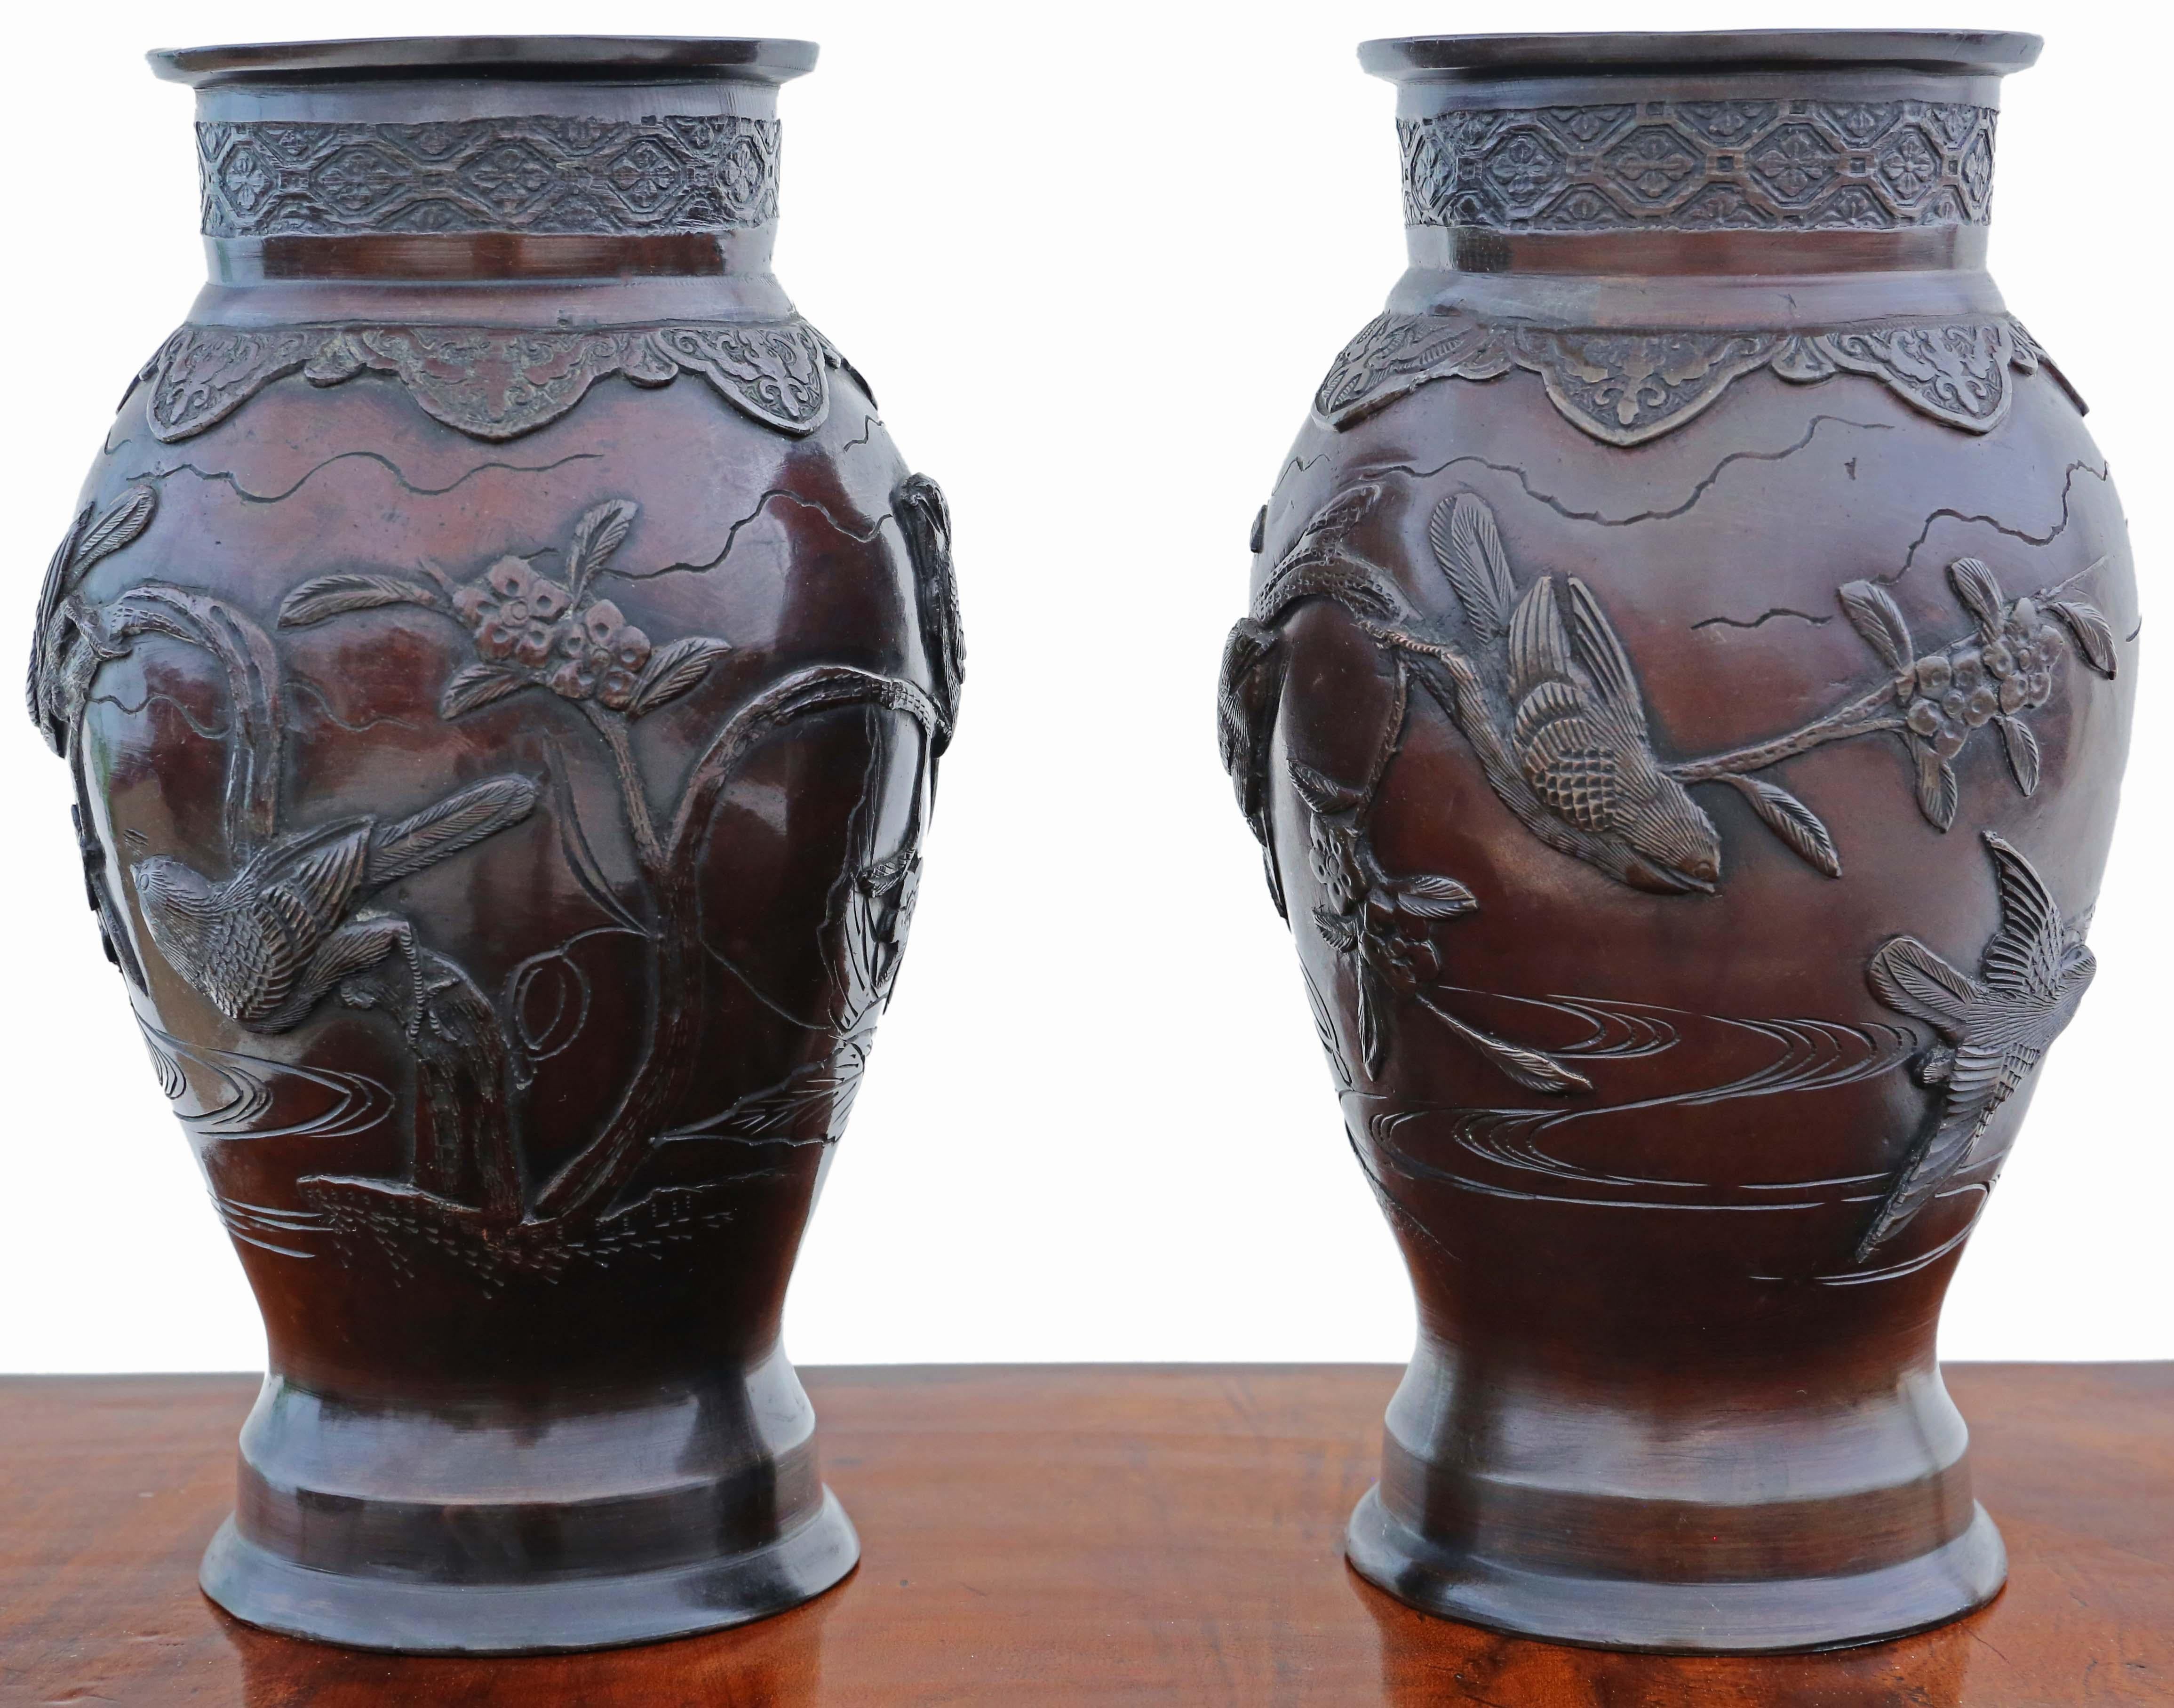 Antique large pair of fine quality Japanese bronze vases 19th Century Meiji Peri In Good Condition For Sale In Wisbech, Cambridgeshire